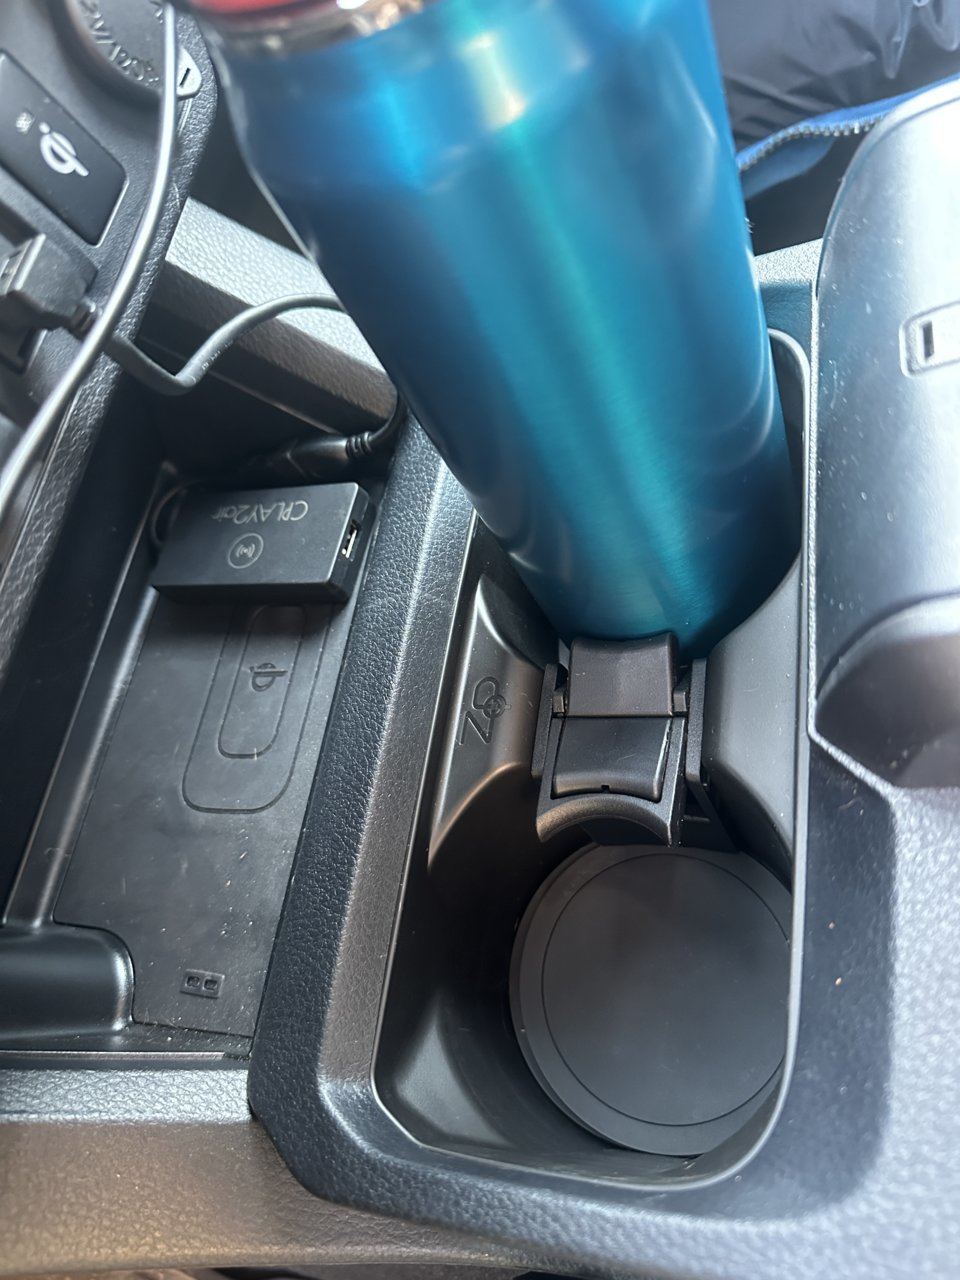 Car Cup Holder Expander with Phone Holder,Compatible with Yeti 20/36/46oz